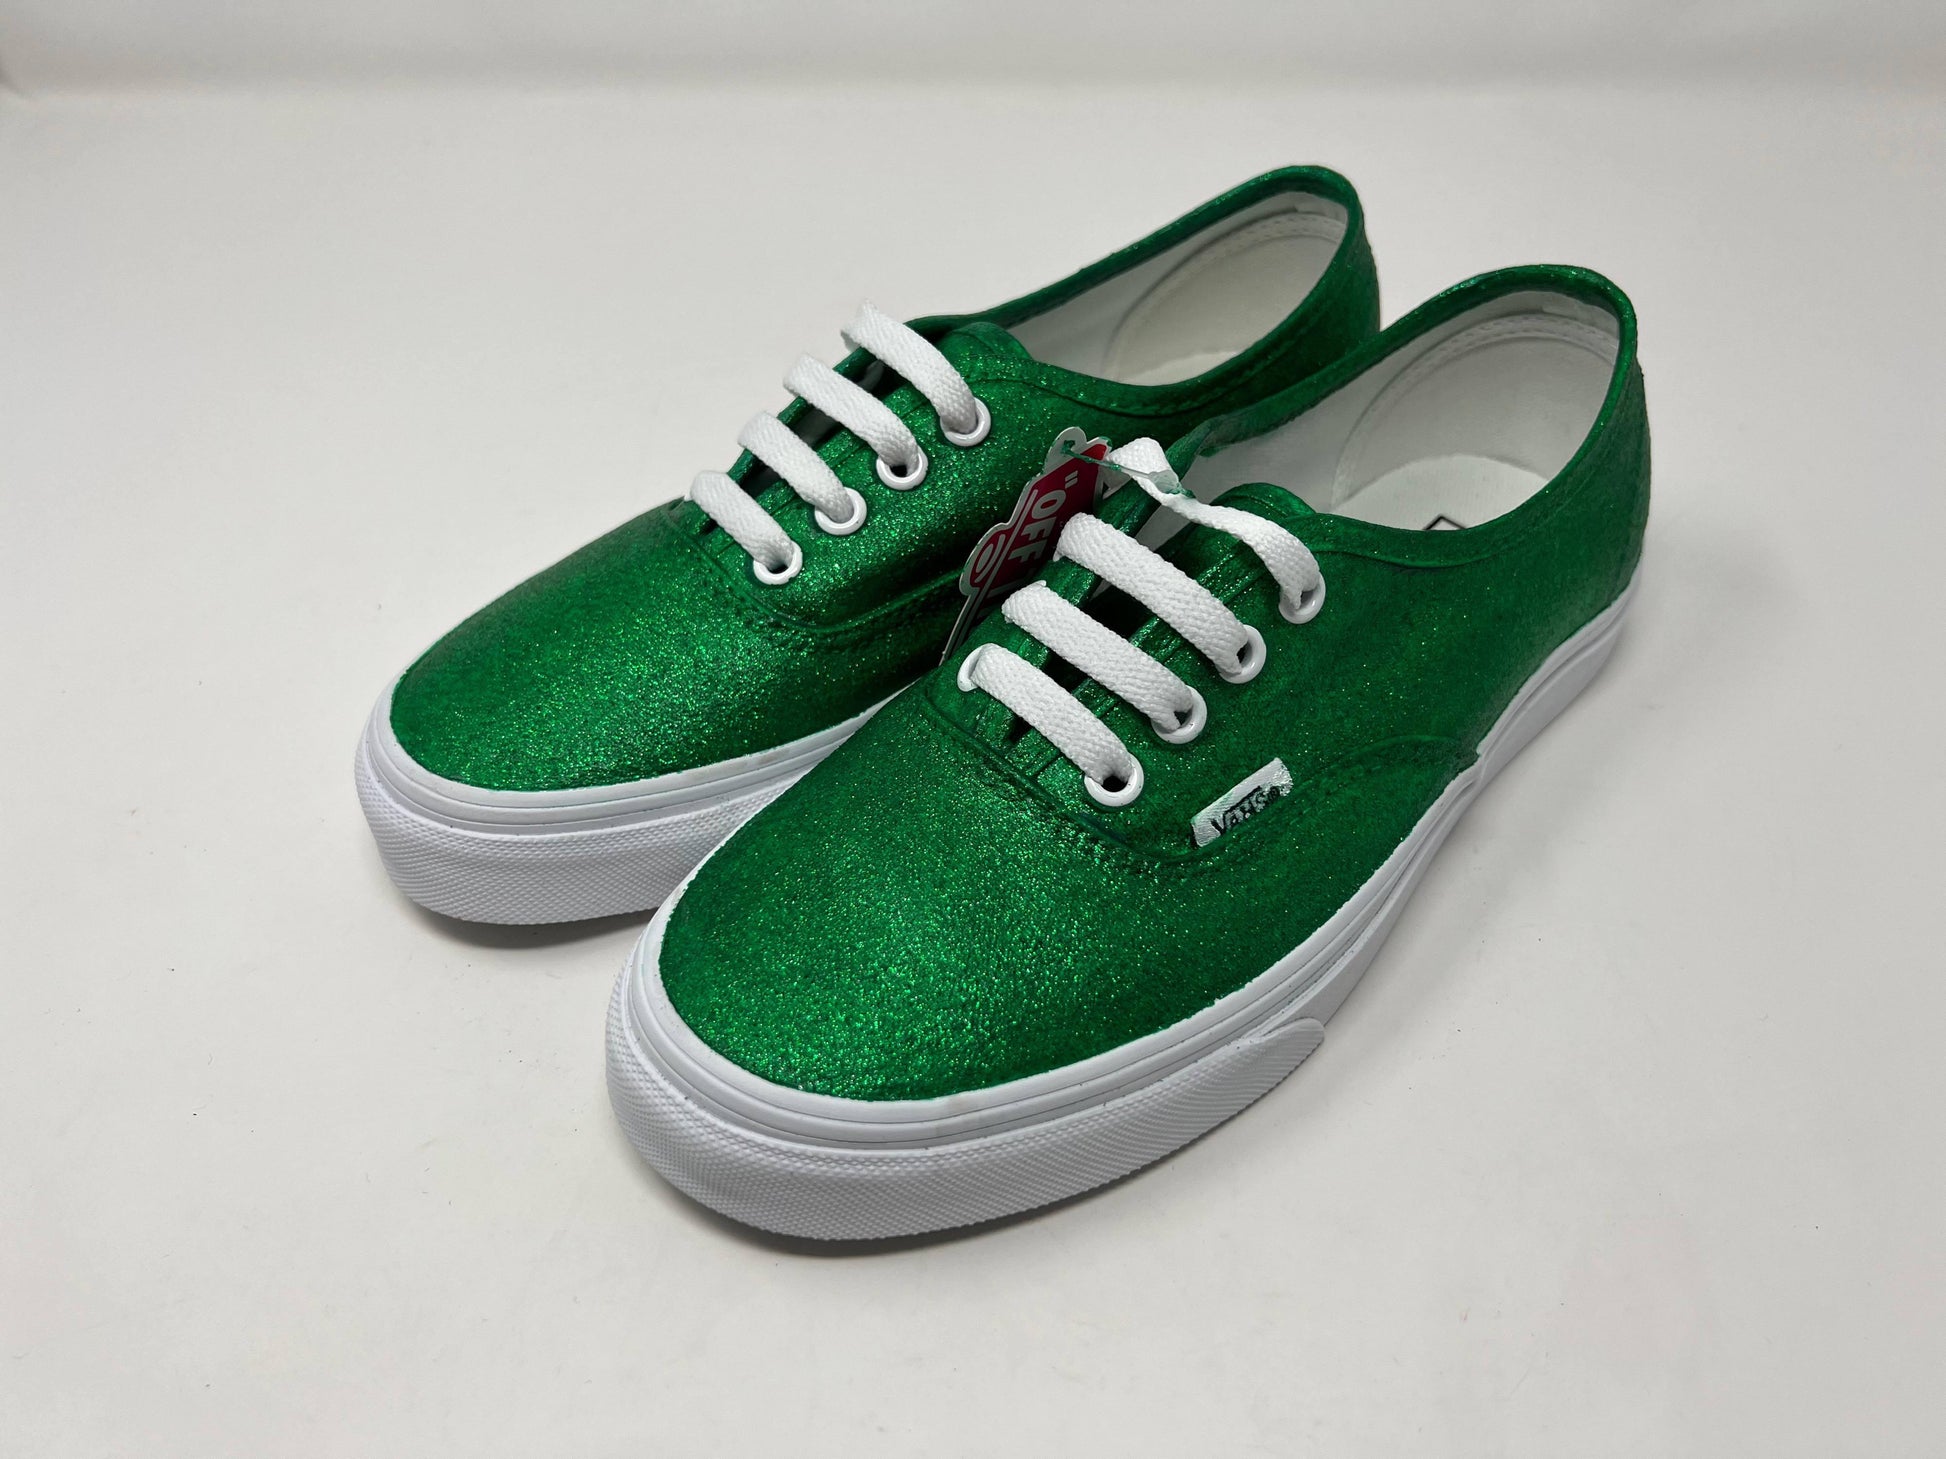 Green Glitter Shoes - ButterMakesMeHappy